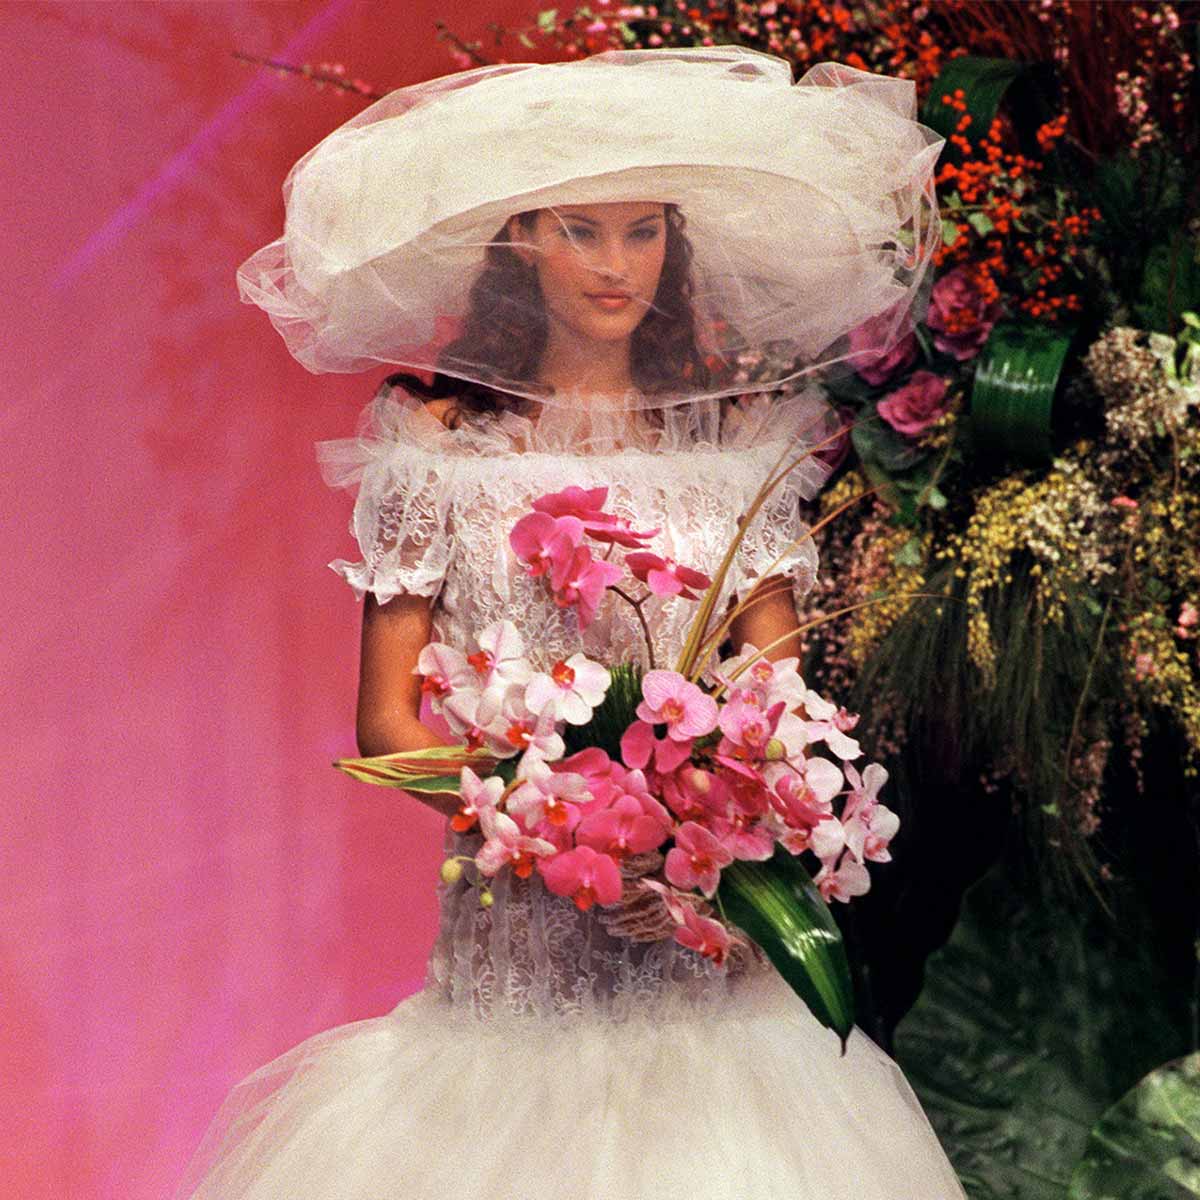 The Most Ridiculous Wedding Dresses of All Time